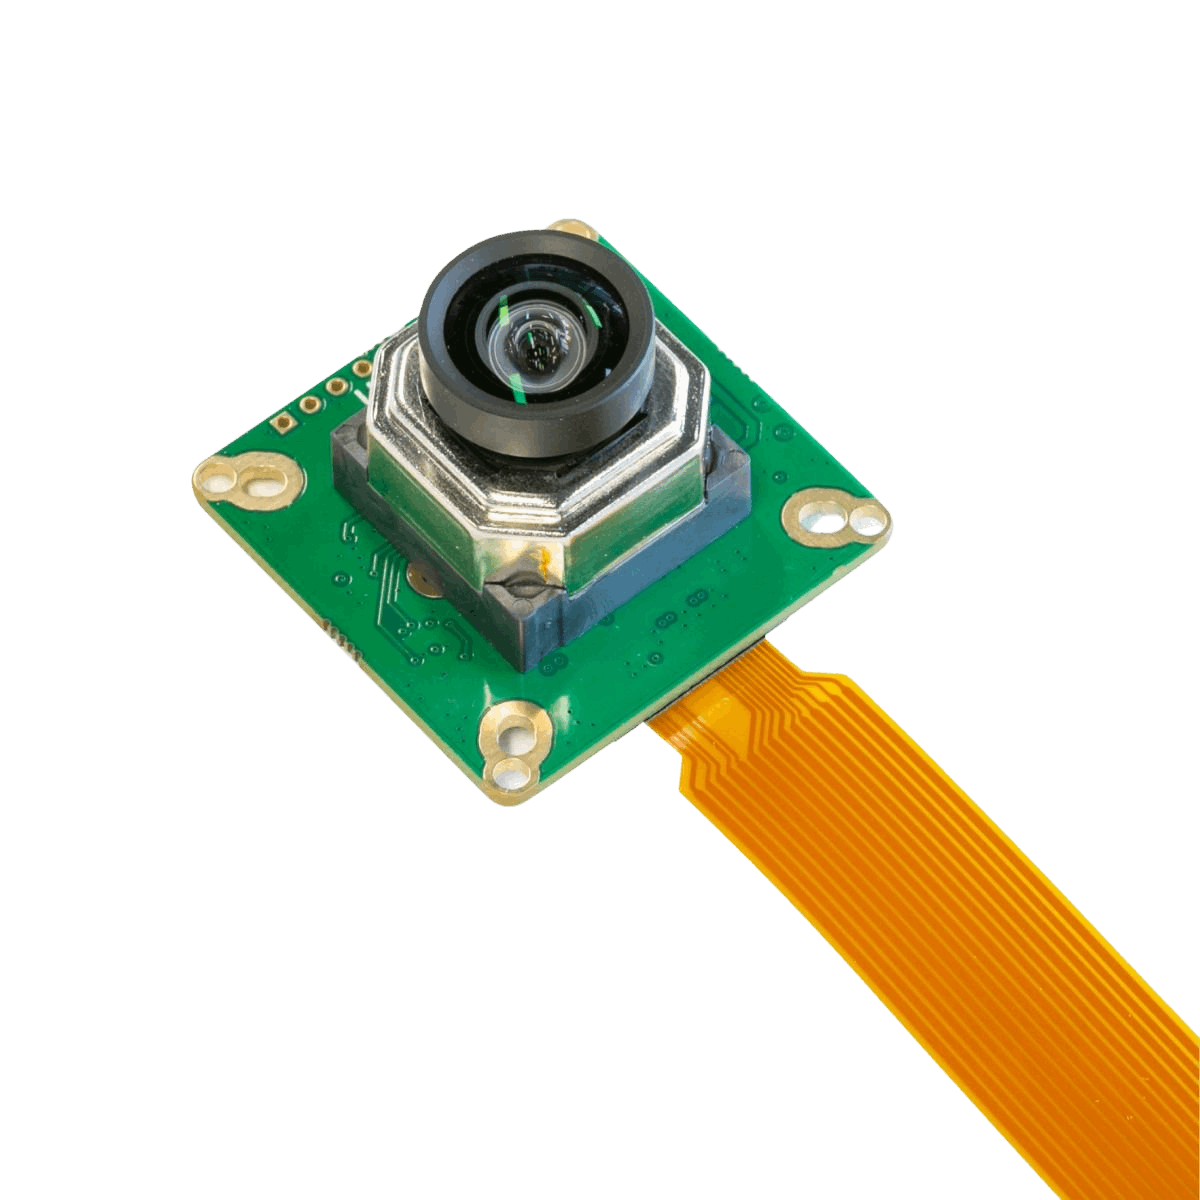 Arducam B0273 12.3MP IMX477 Motorised camera module viewed from the top